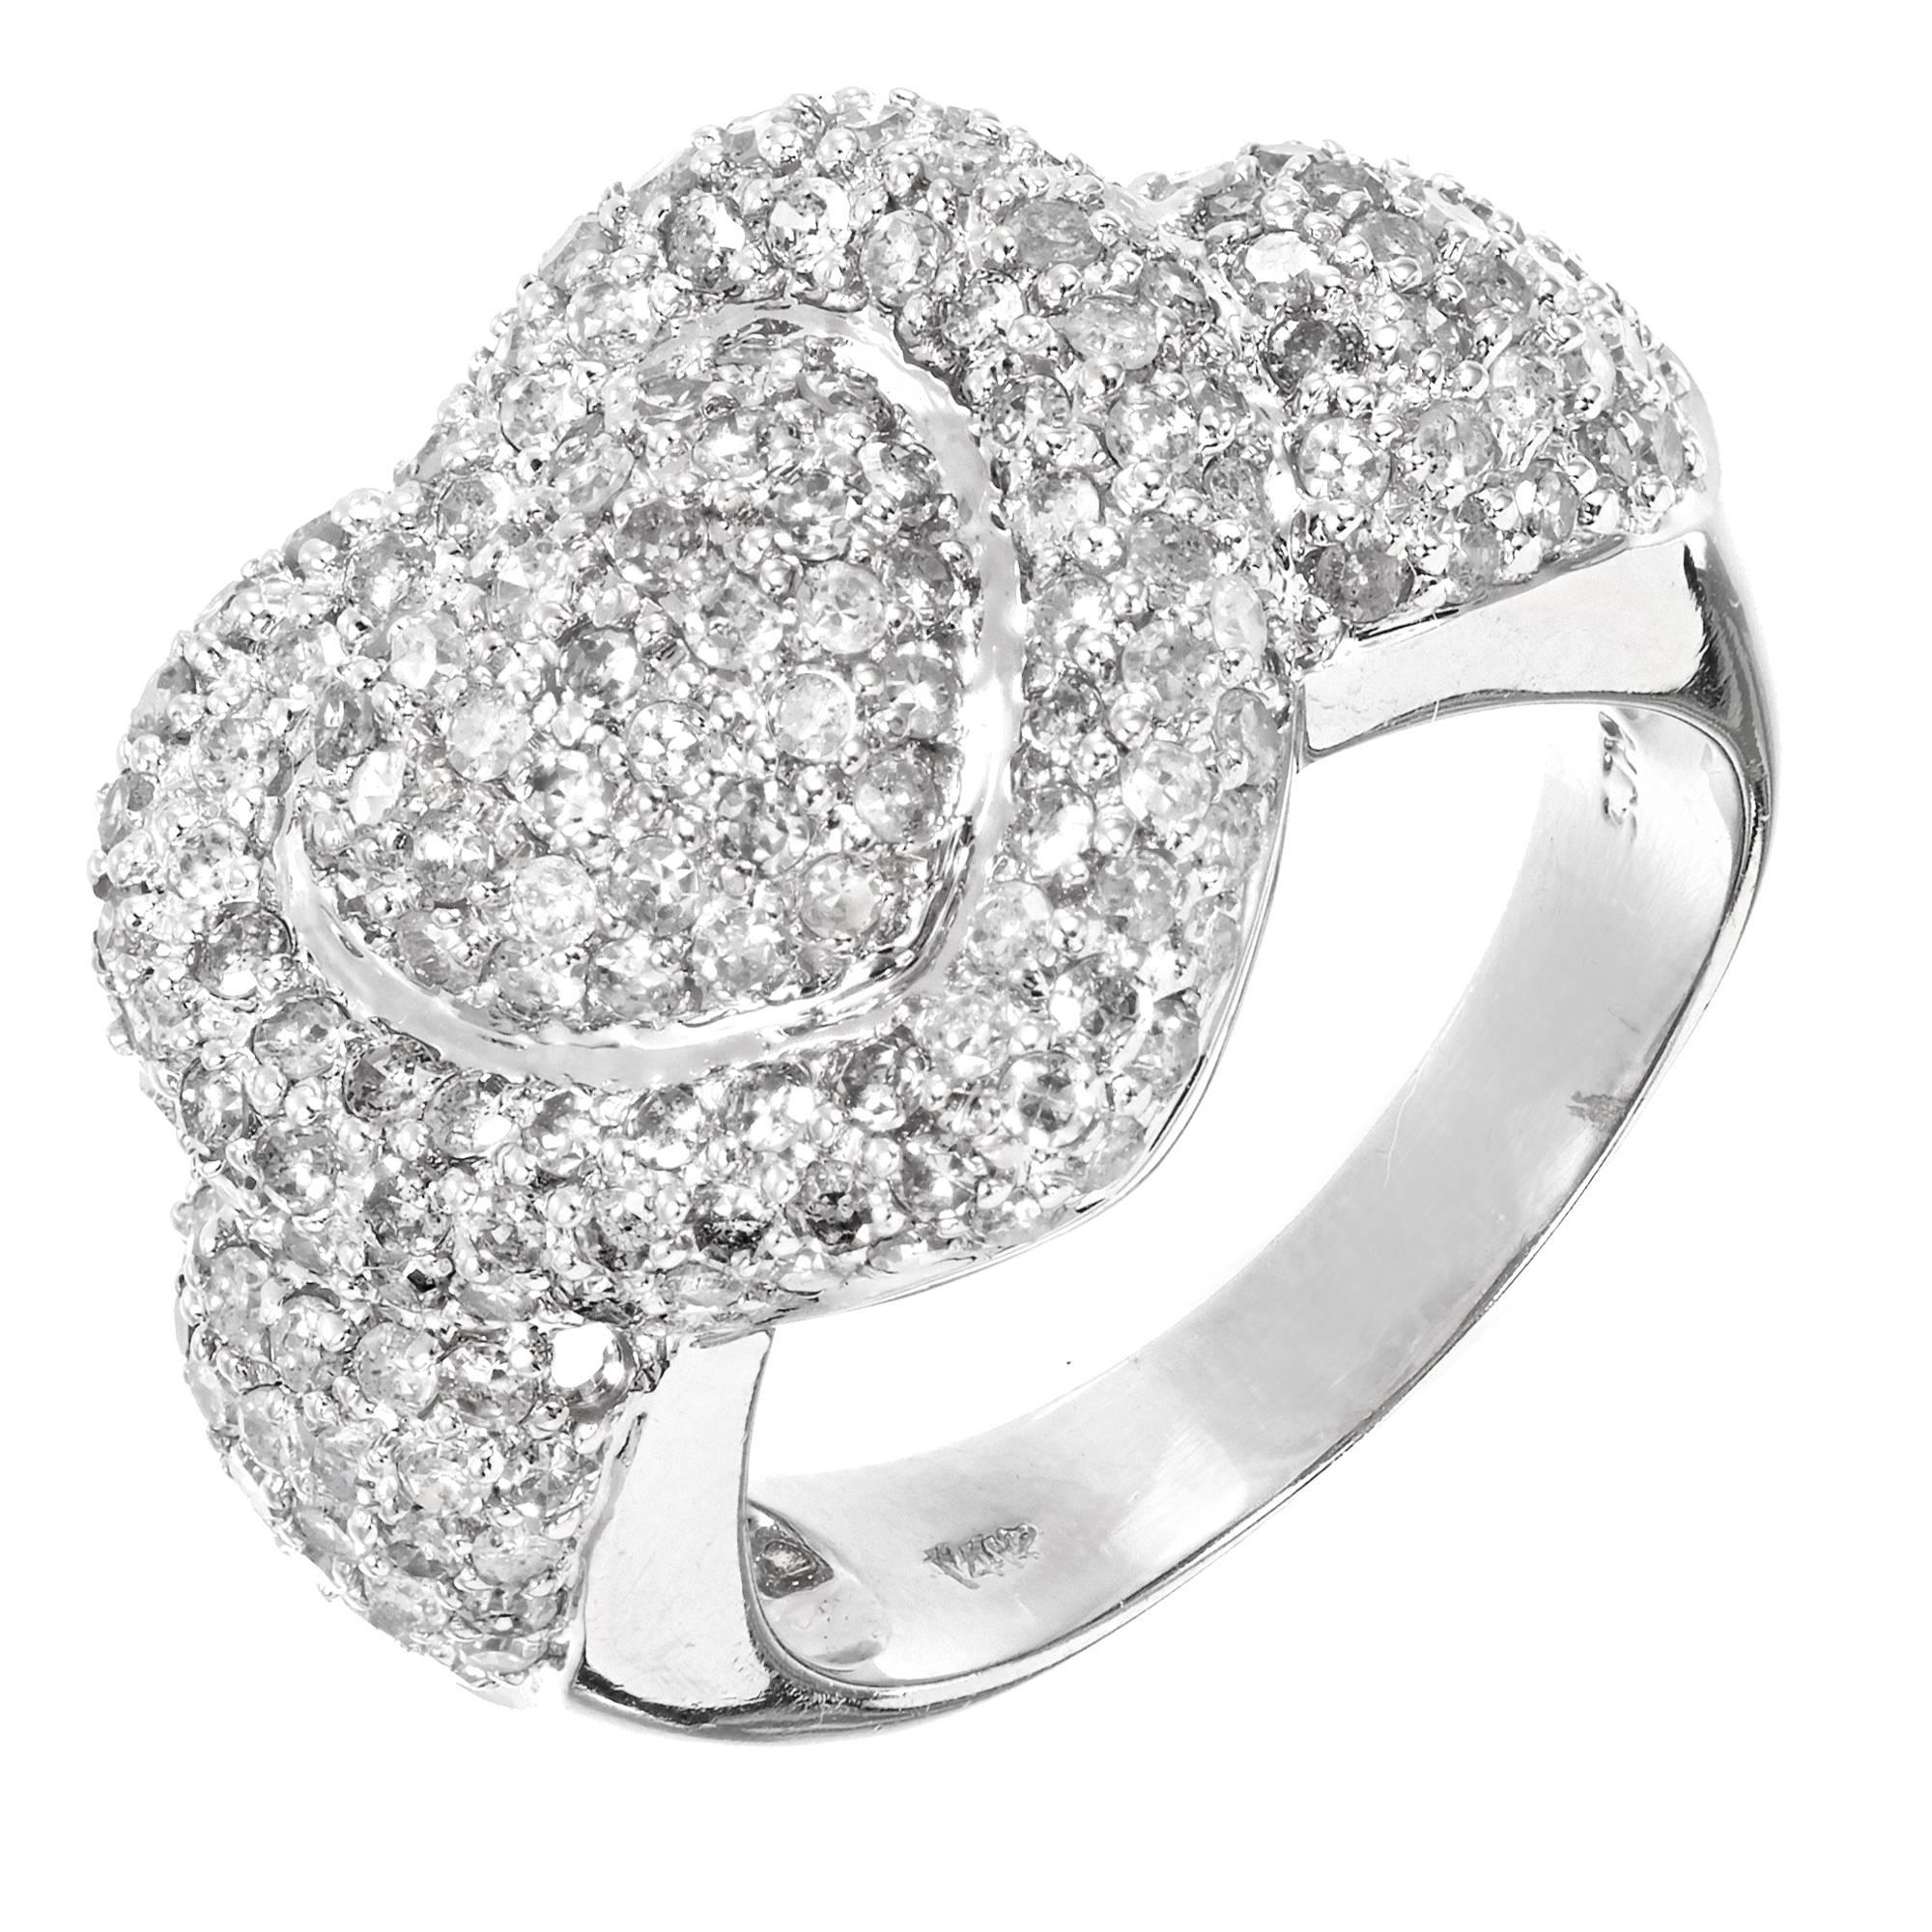 Domed 14k white gold pavé set heart cocktail ring with full cut diamonds set very closely together, all bright and sparkly.

Approx. 192 full cut diamonds, approx. total weight 2.75cts, H, SI1 - I1
Stamped: 14k SJM
14k White Gold
9.2 grams
Width at